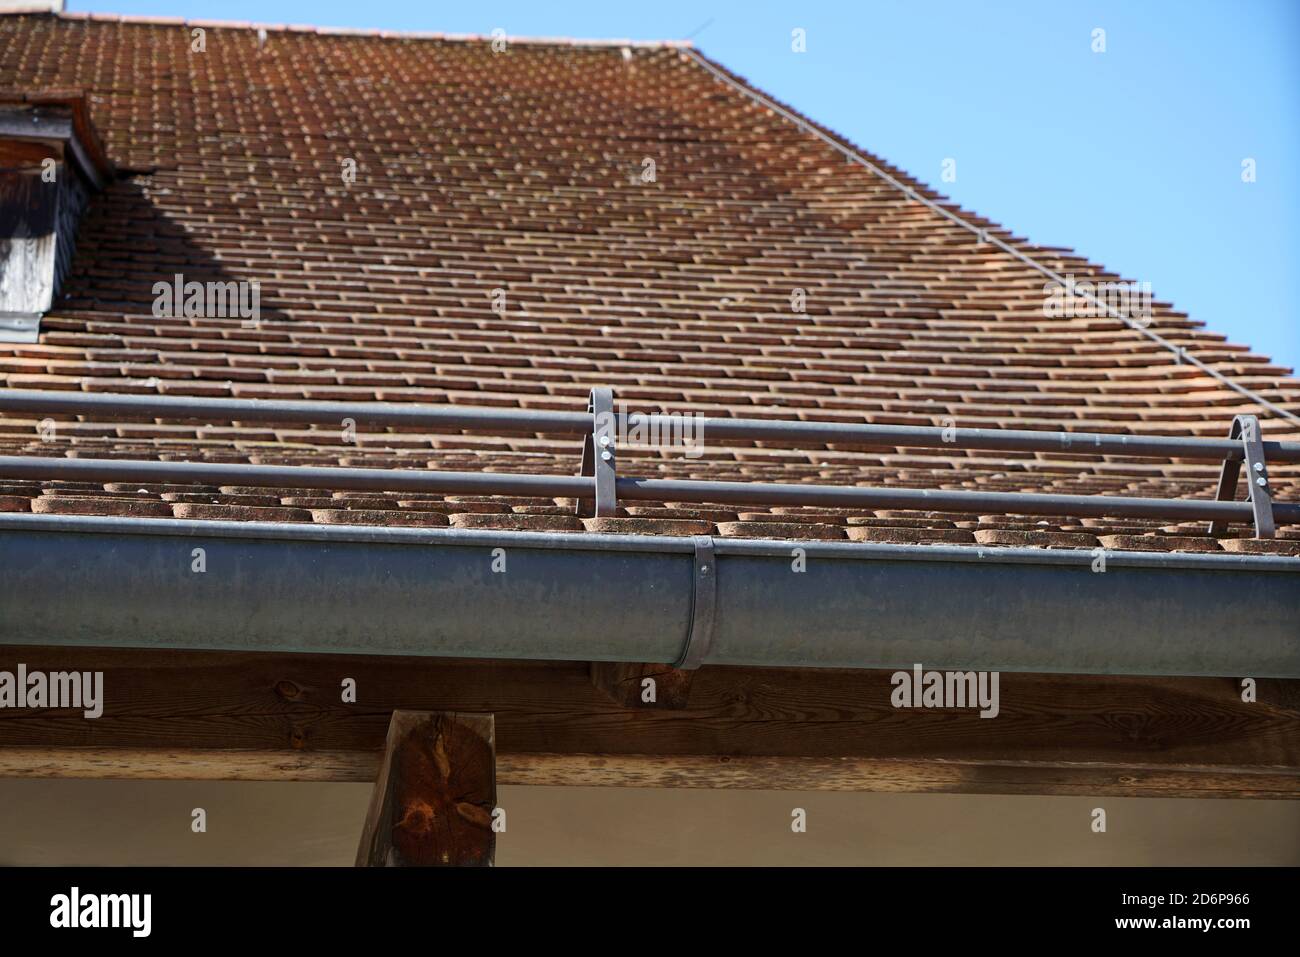 Low angle shot of a building with a concrete tile roof under the sunlight Stock Photo